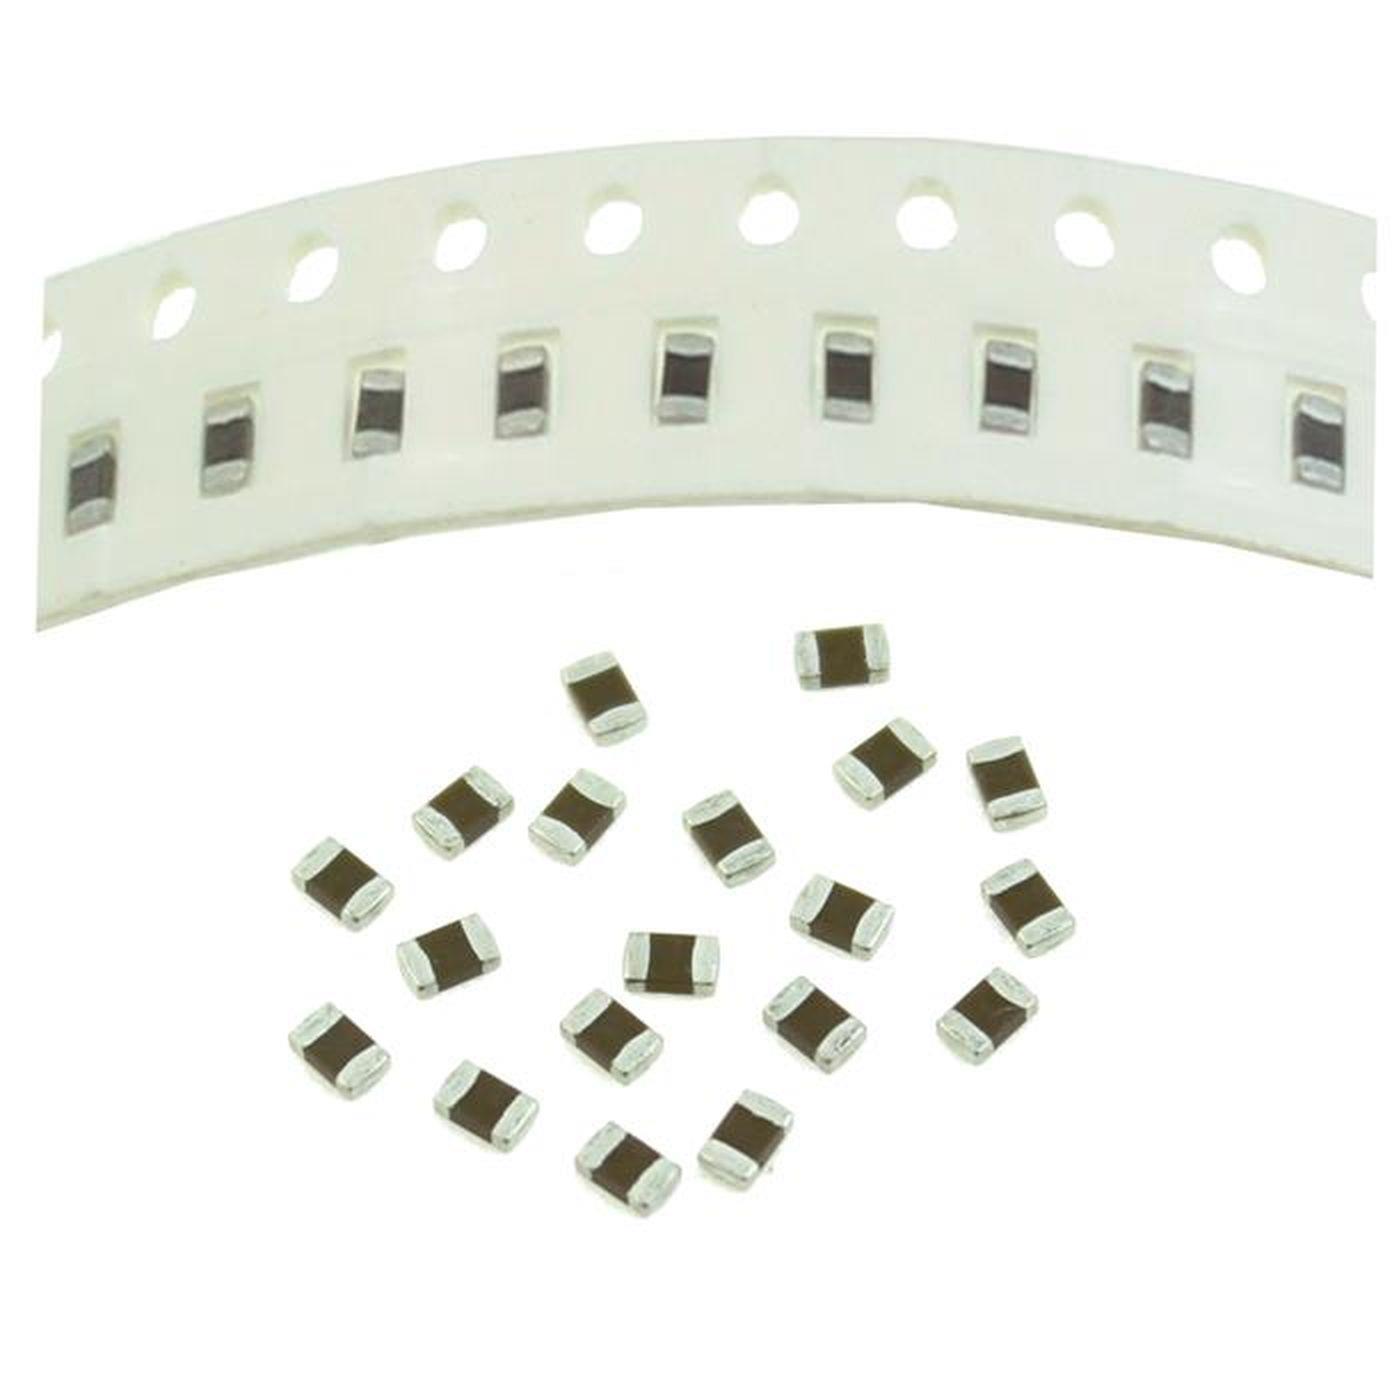 500x SMD Kondensator 0,5pF 100V 0805 NP0 / C0G muRata GRM40C0G0R5C3 0,0005nF